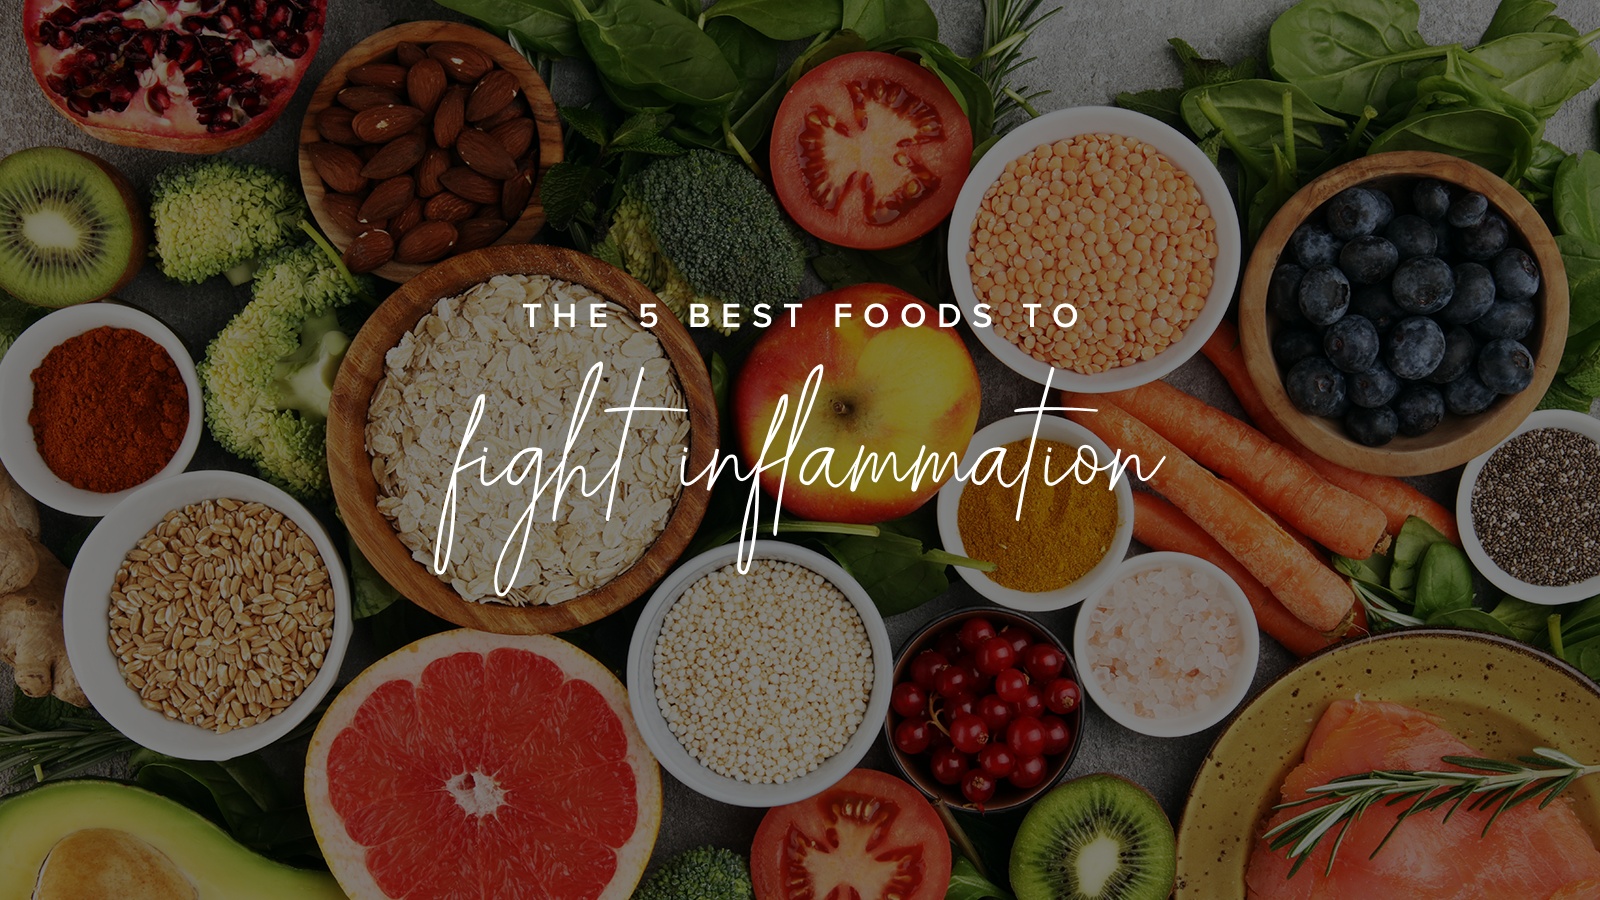 The 5 Best Foods to Fight Inflammation